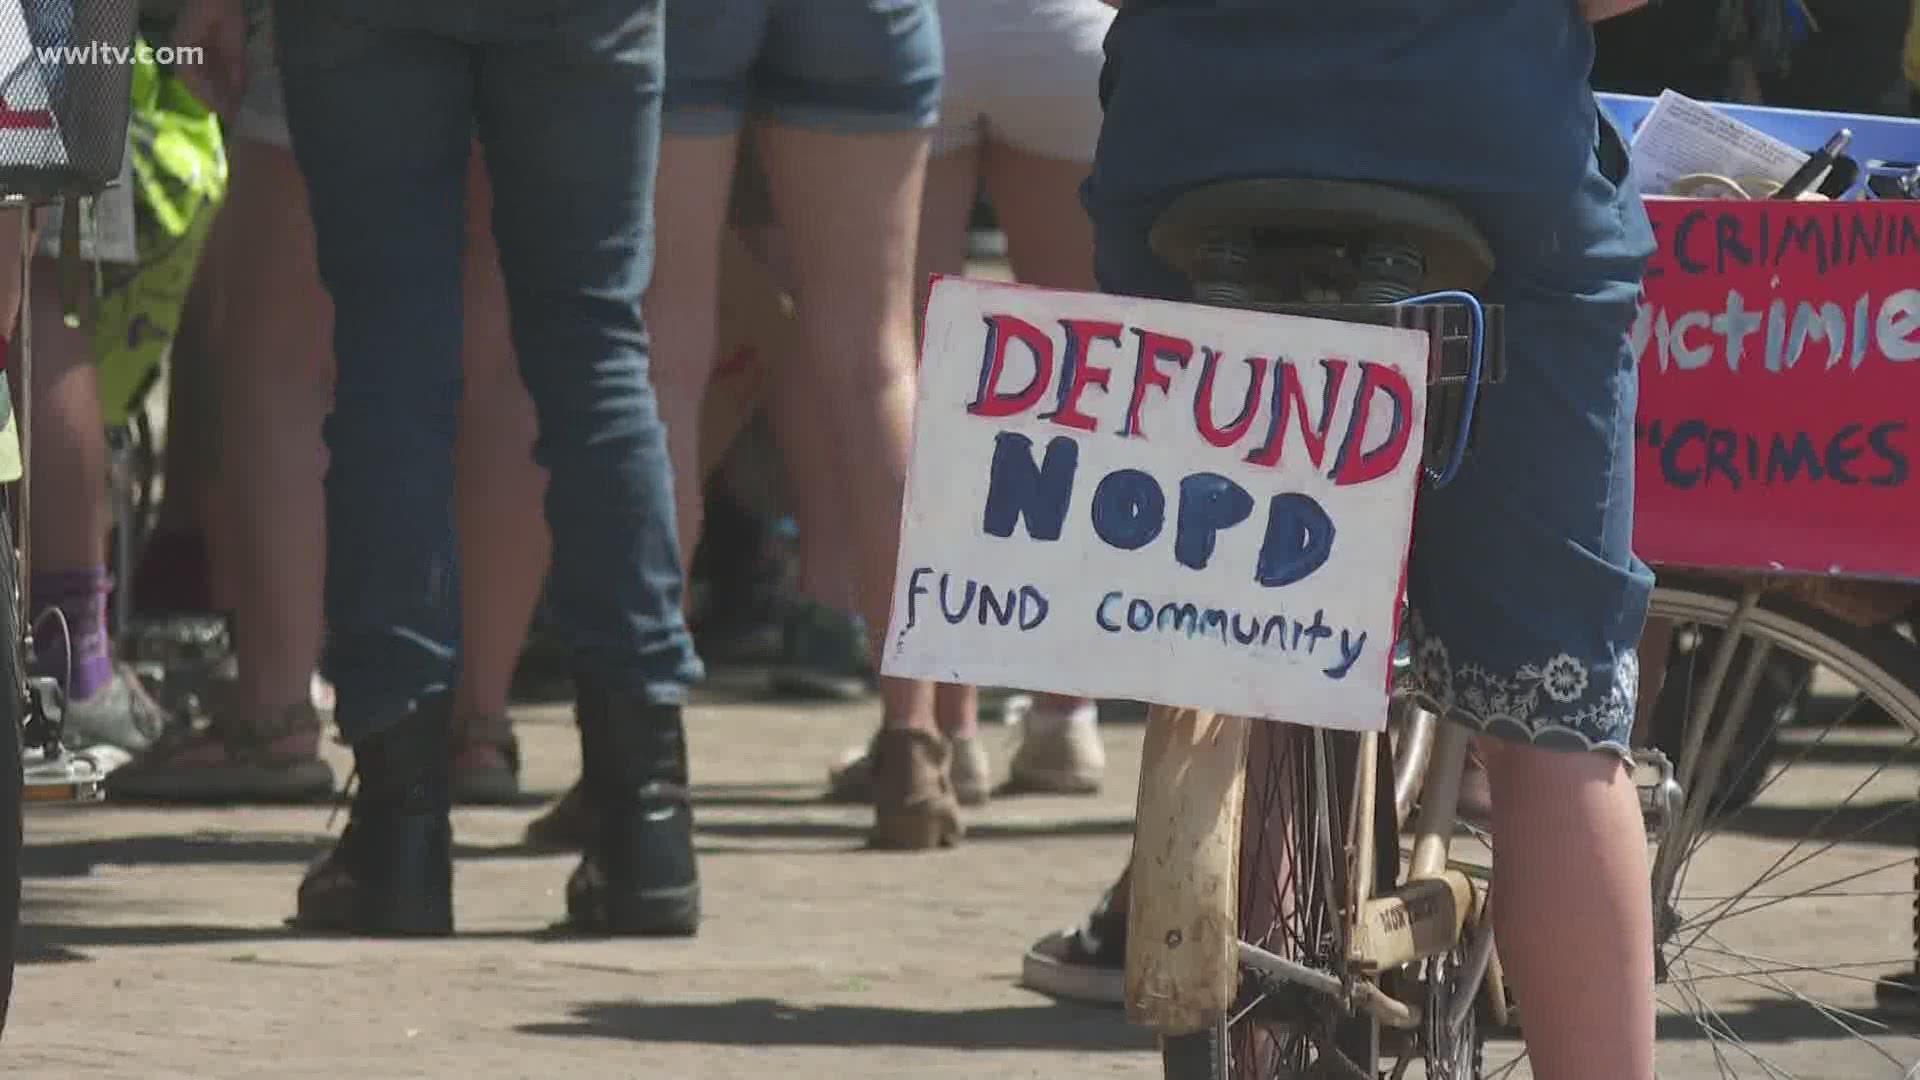 “Defund is a harsh word, right? We could have said ‘reallocate’, we could have said ‘redistribute’. We’ve been saying those words for years," Dumas said.